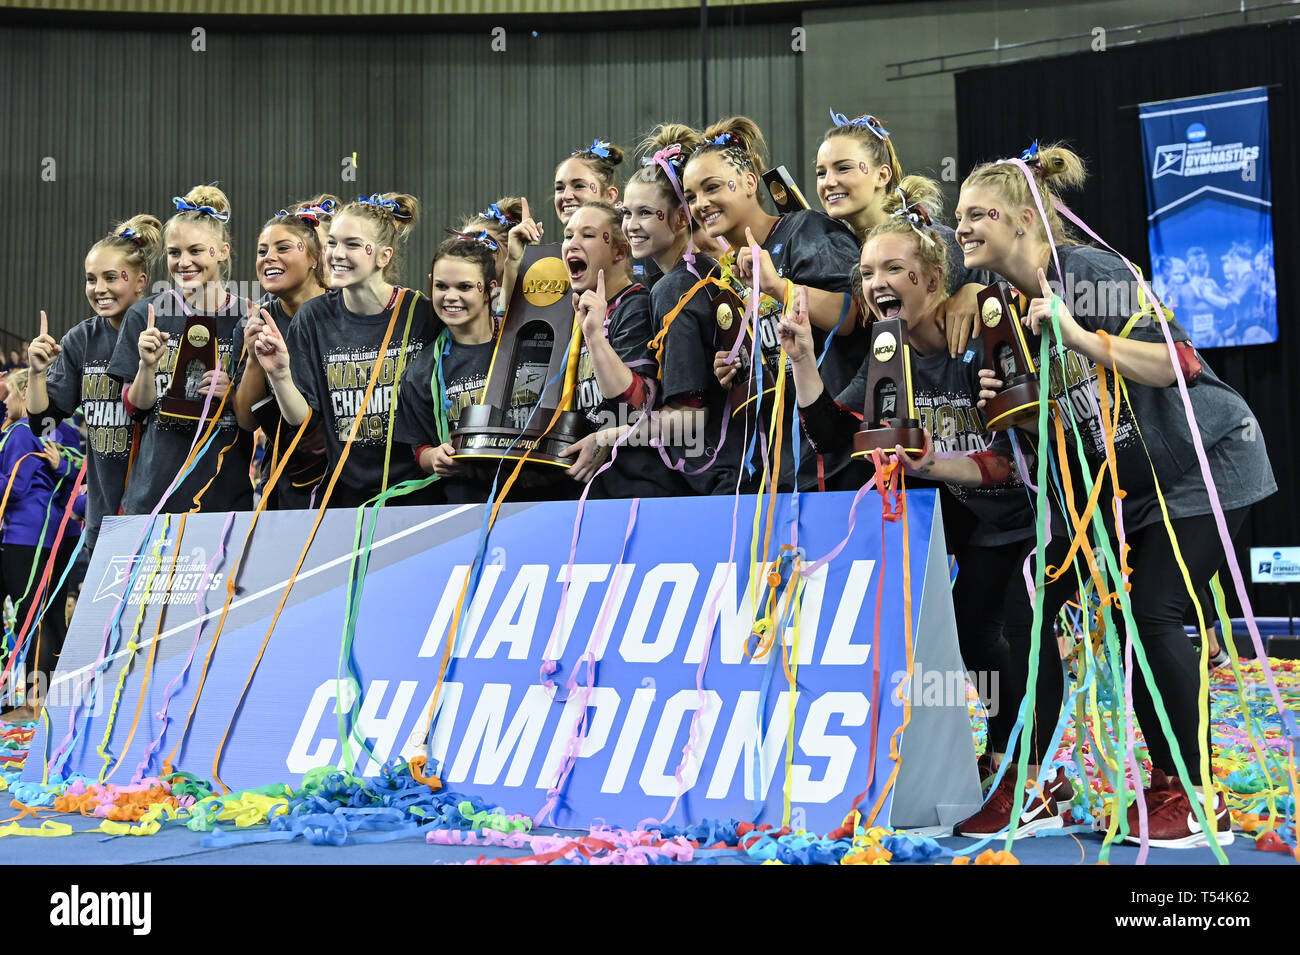 Fort Worth, Texas, USA. 20th Apr, 2019. The team from the University of Oklahoma poses after winning the Team Final held at the Fort Worth Convention Center in Fort Worth, Texas. Credit: Amy Sanderson/ZUMA Wire/Alamy Live News Stock Photo